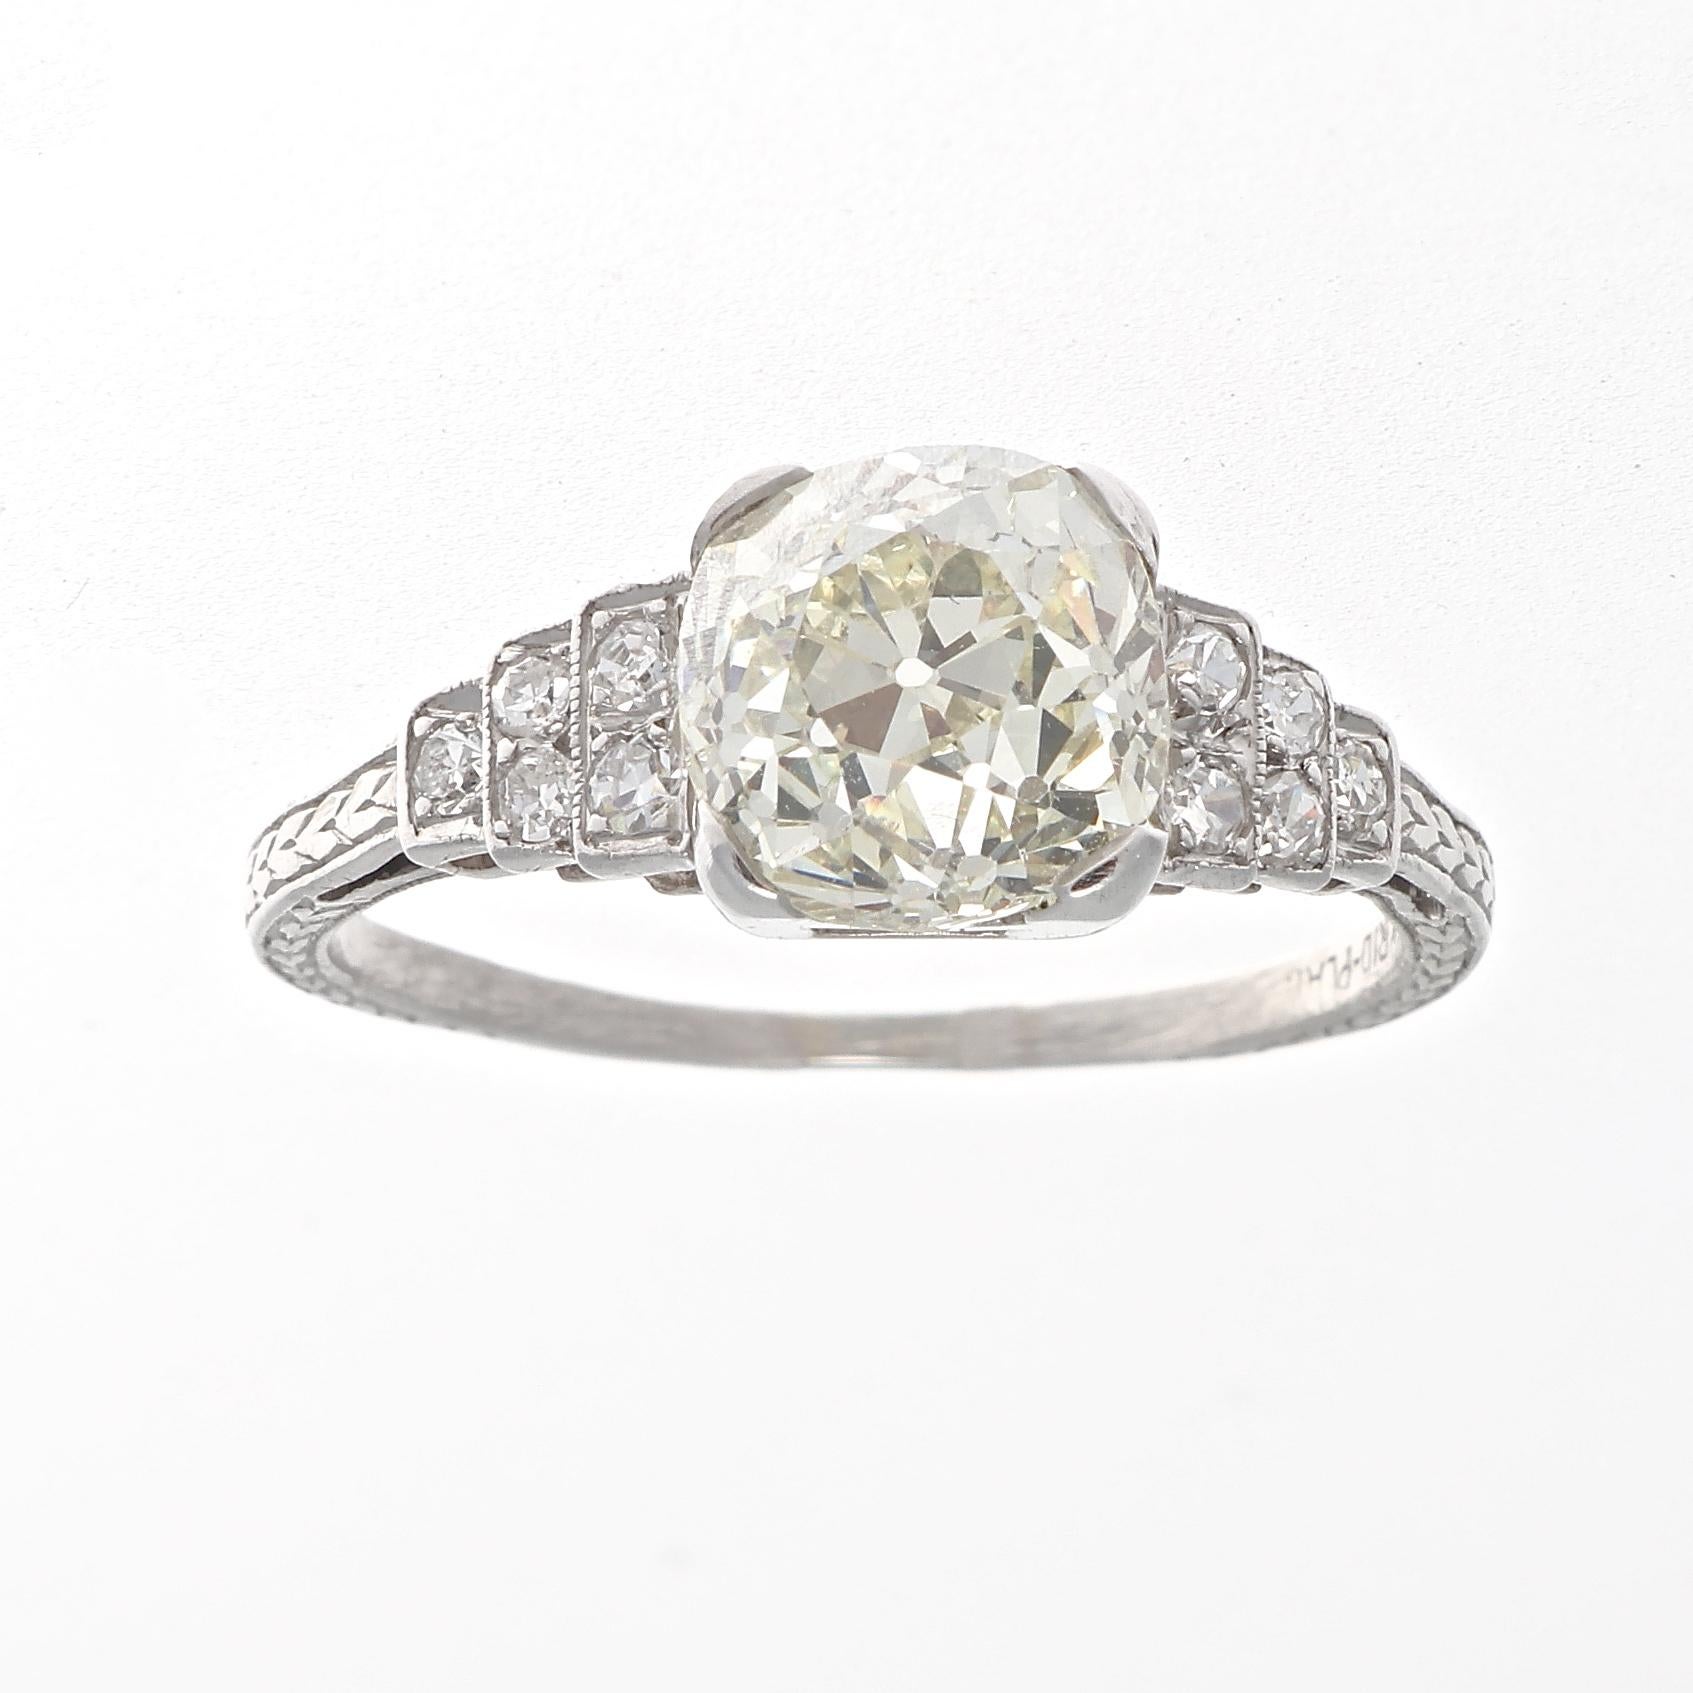 Tradition and design that will last a lifetime. Featuring a warm and charming 2.60 carat old mine cut dimaond that accented by tiered levels of near colorless old cut diamonds. Crafted in platinum. Ring size 8 and can easily be resized to fit, if